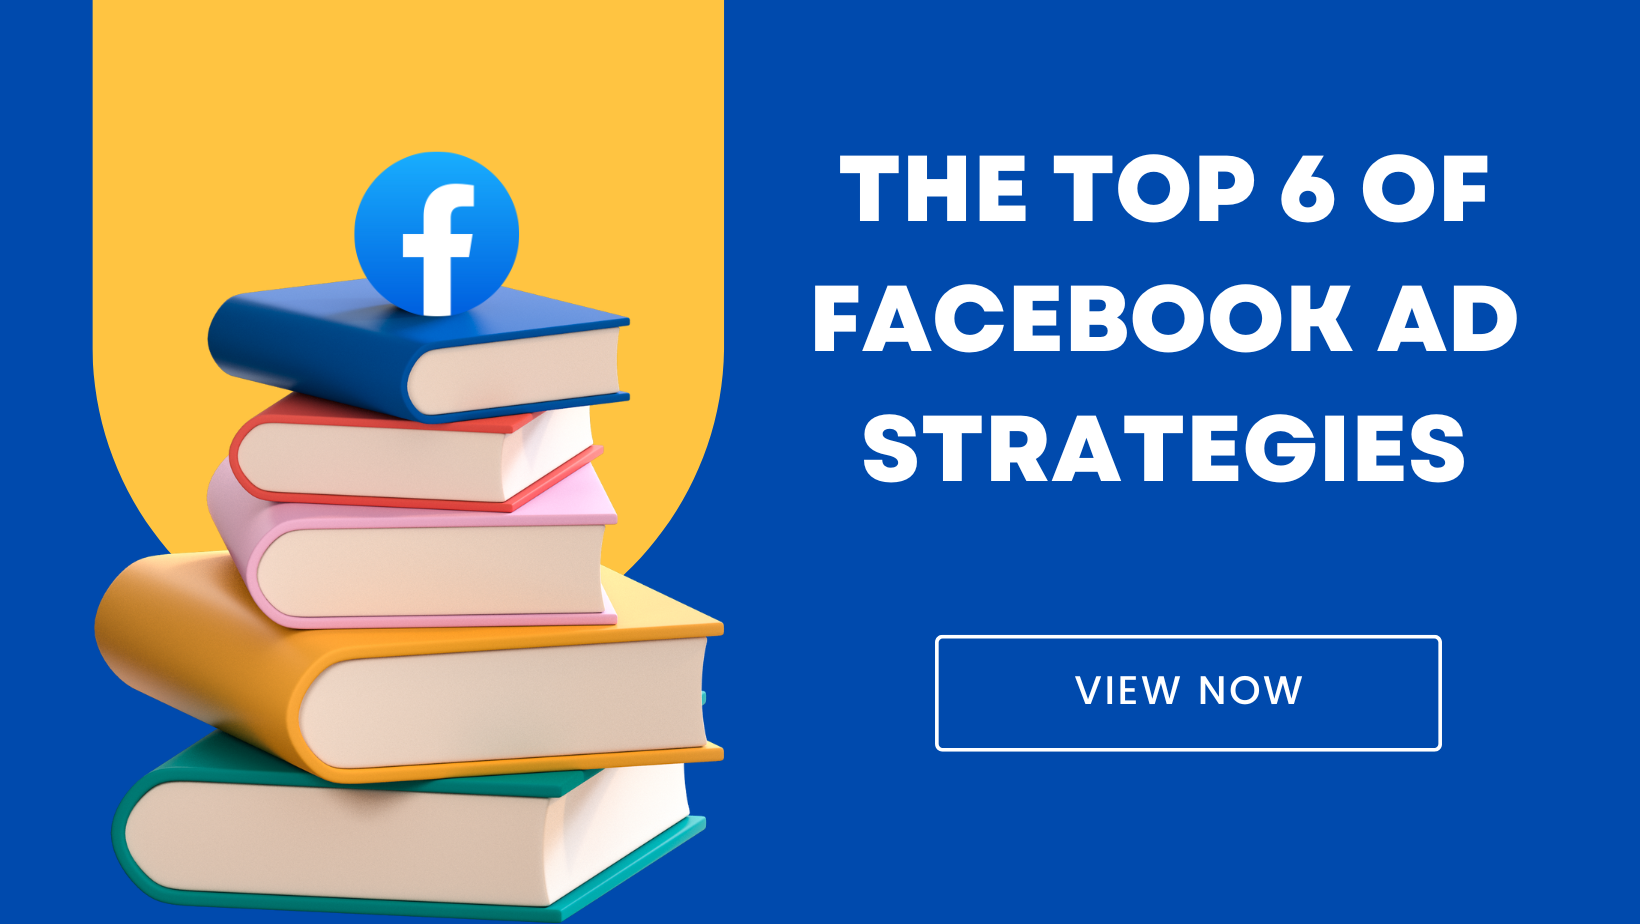 The Top 6 of Facebook Ad Strategies